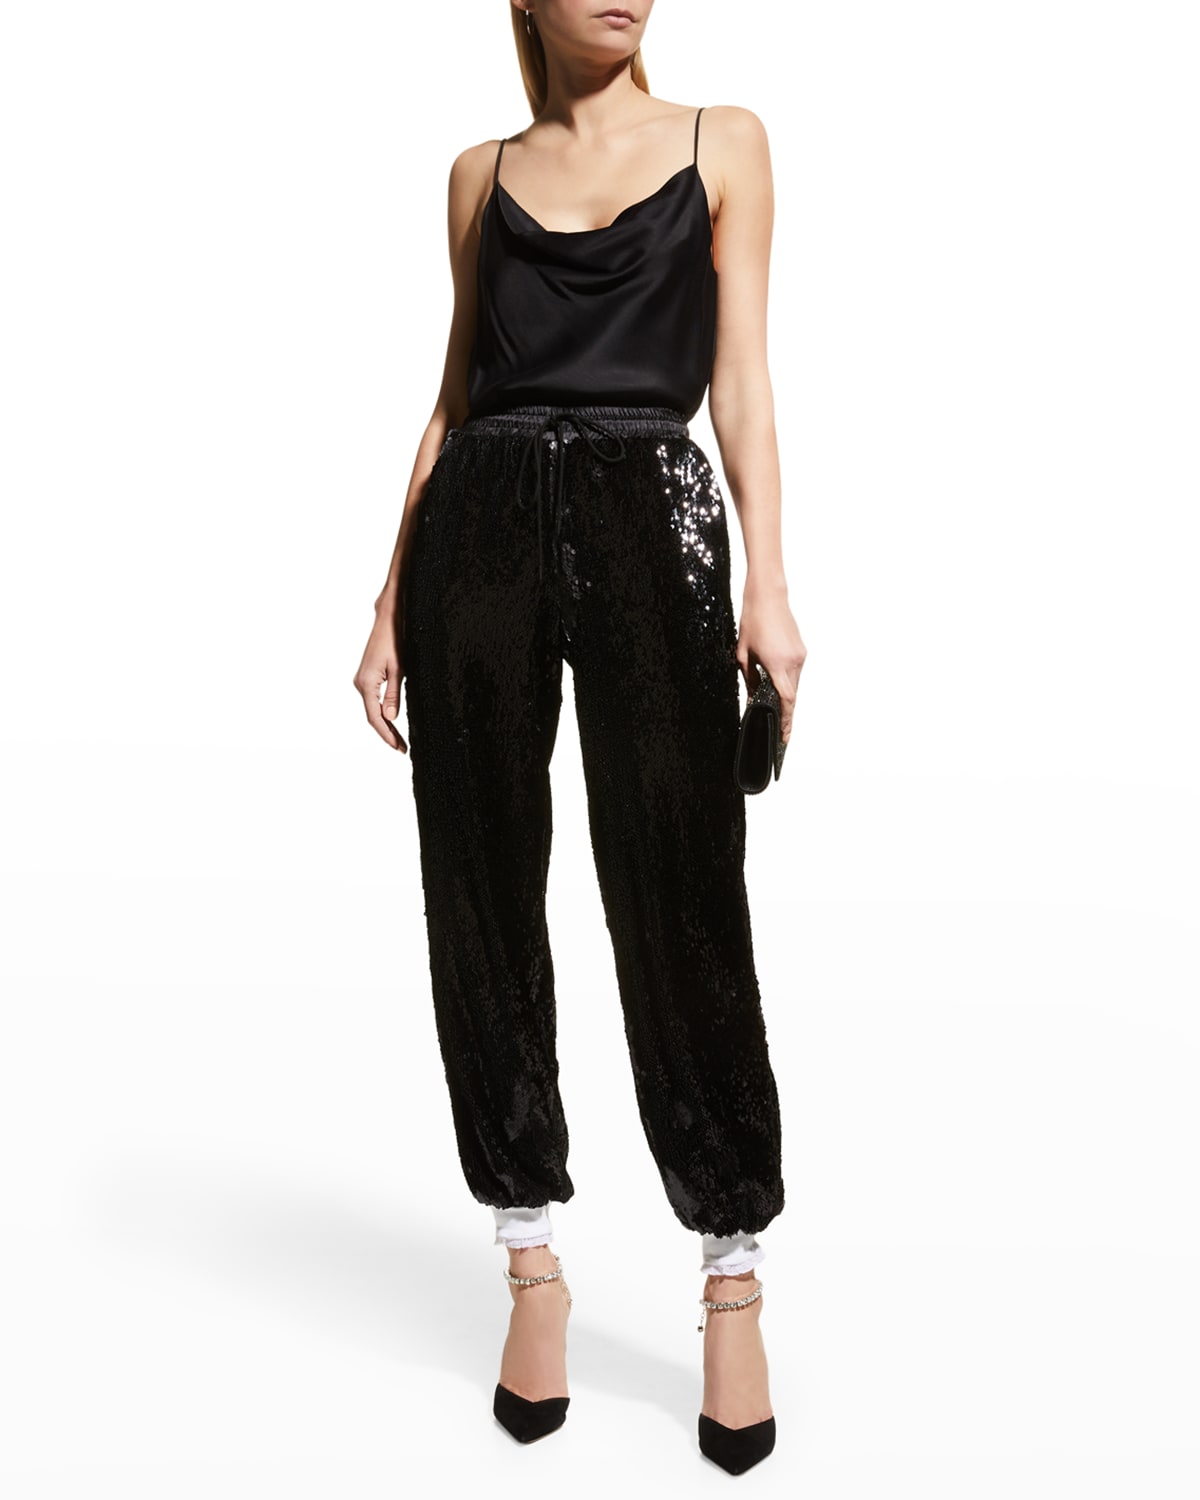 RODARTE SEQUIN-EMBELLISHED DRAWSTRING TRACK PANTS WITH RUFFLE CUFF